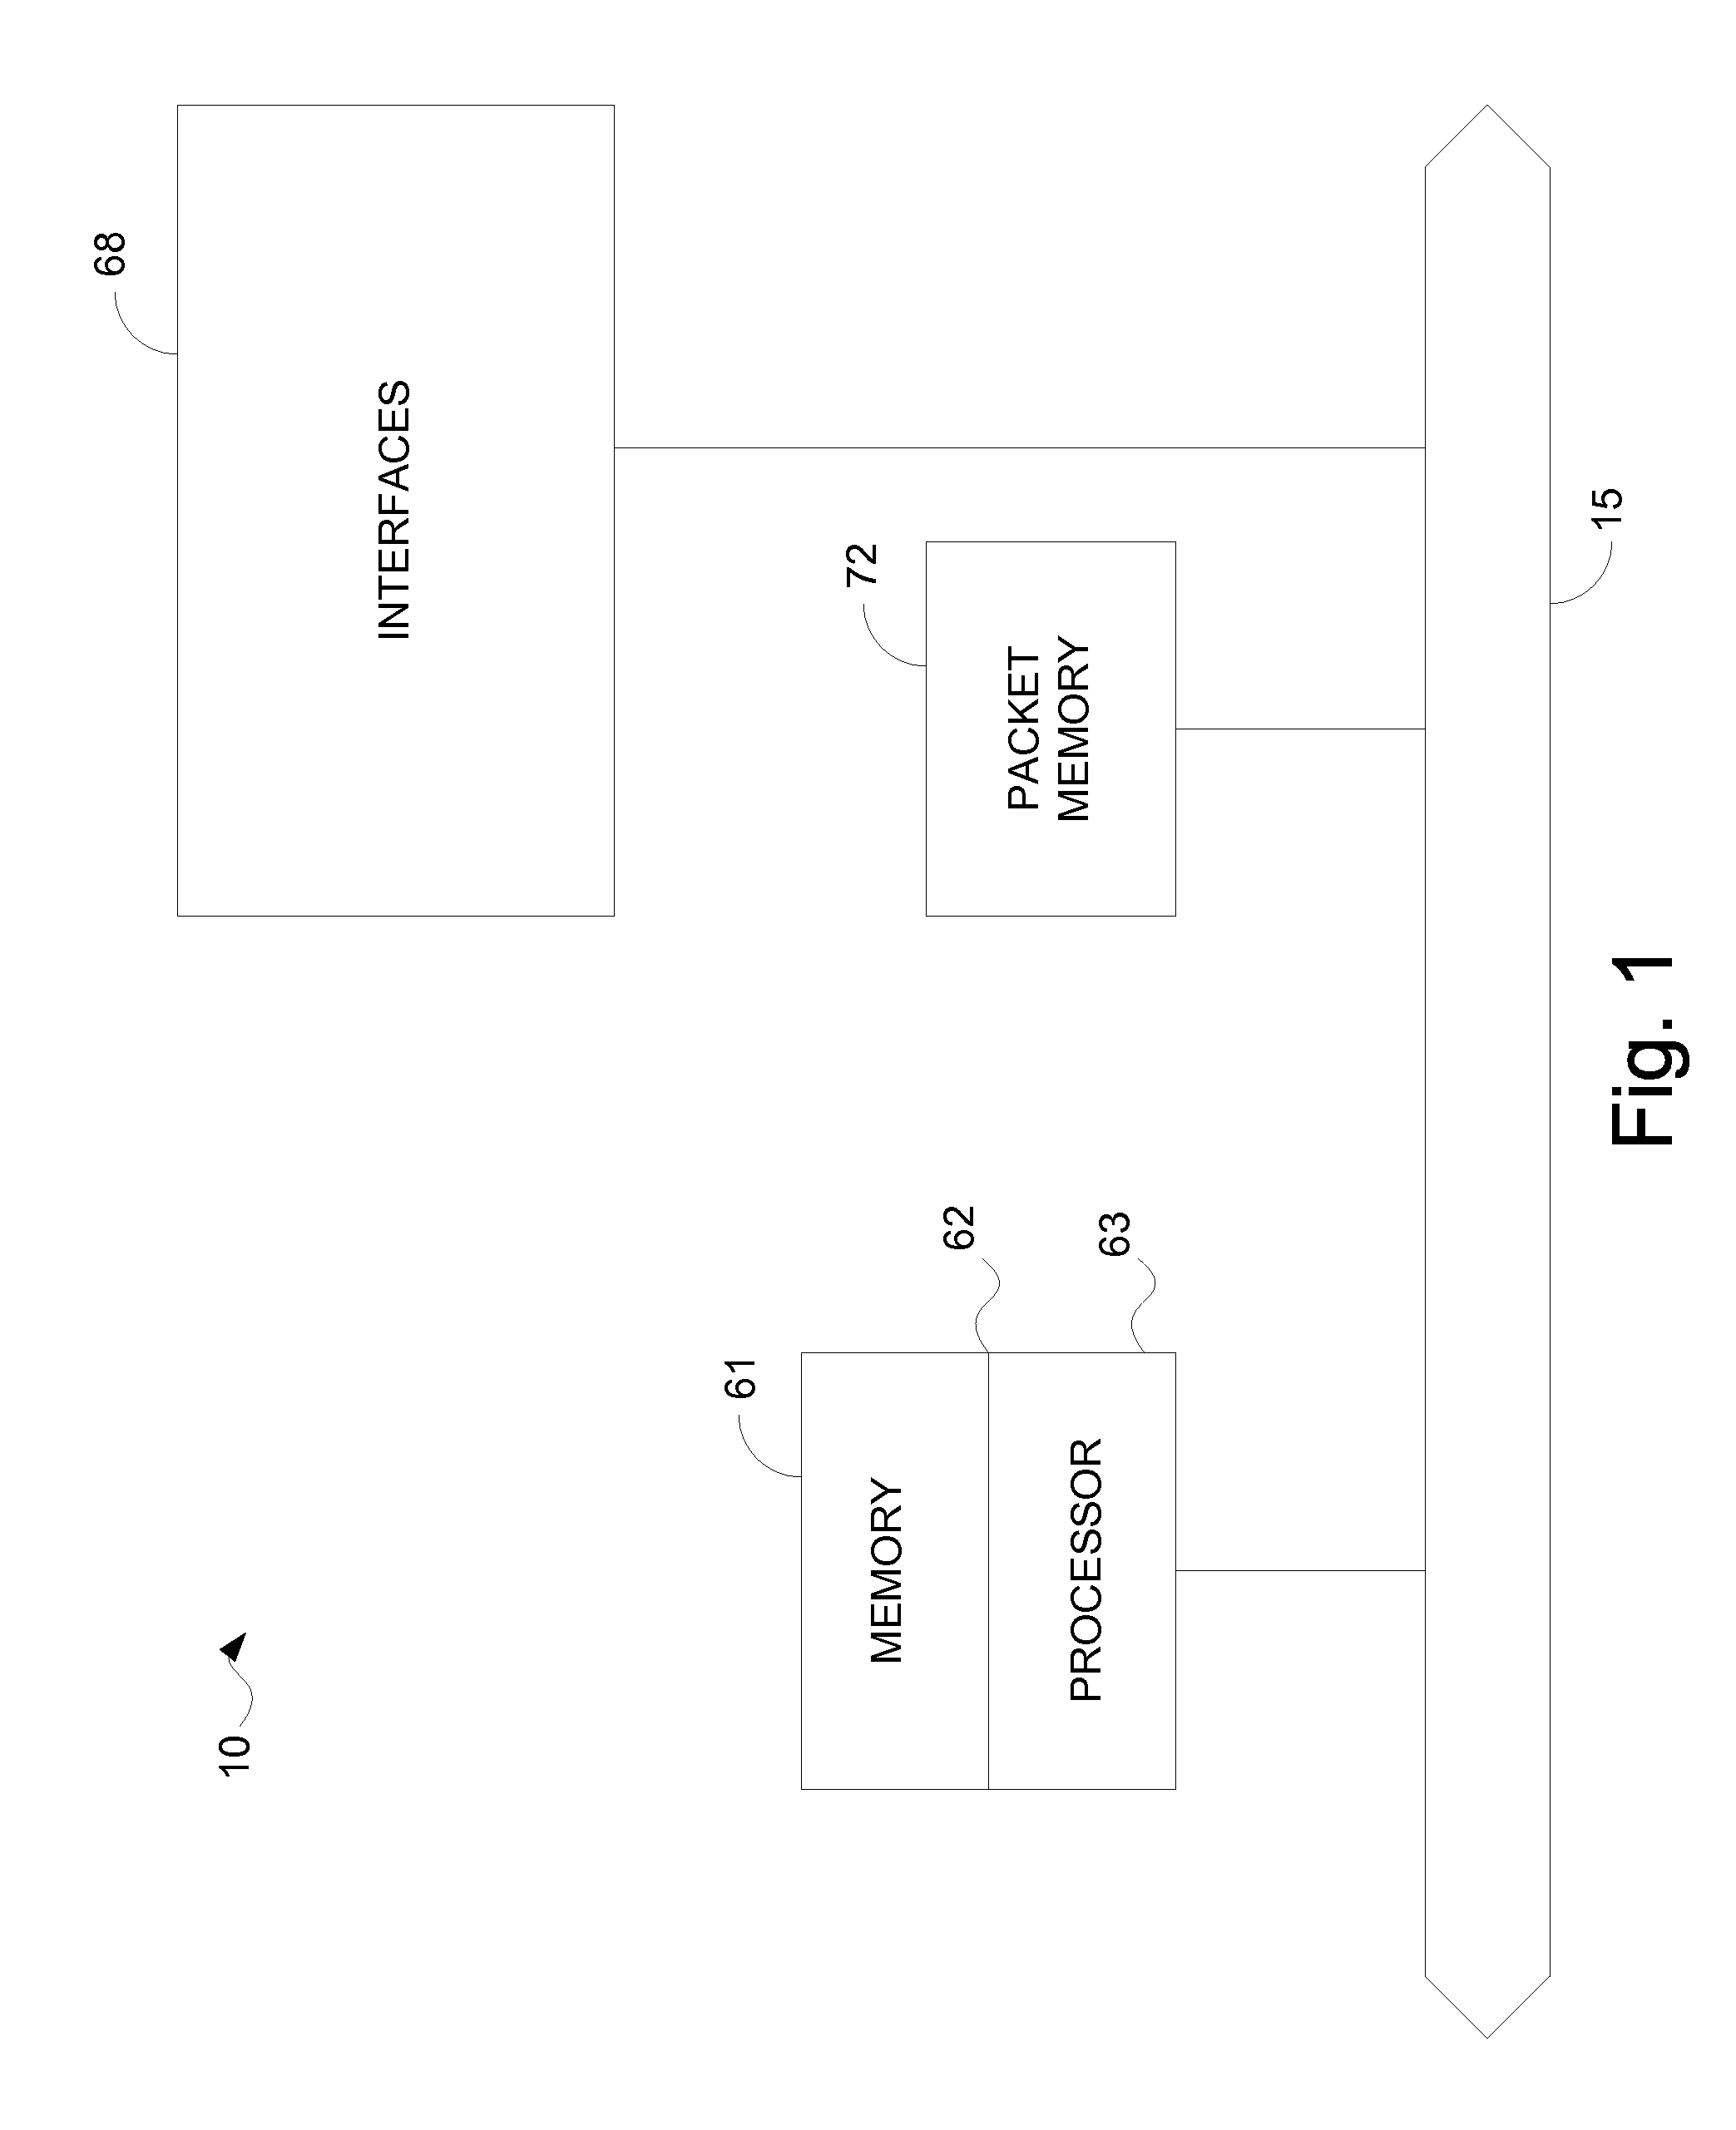 Communication system with content-based data compression